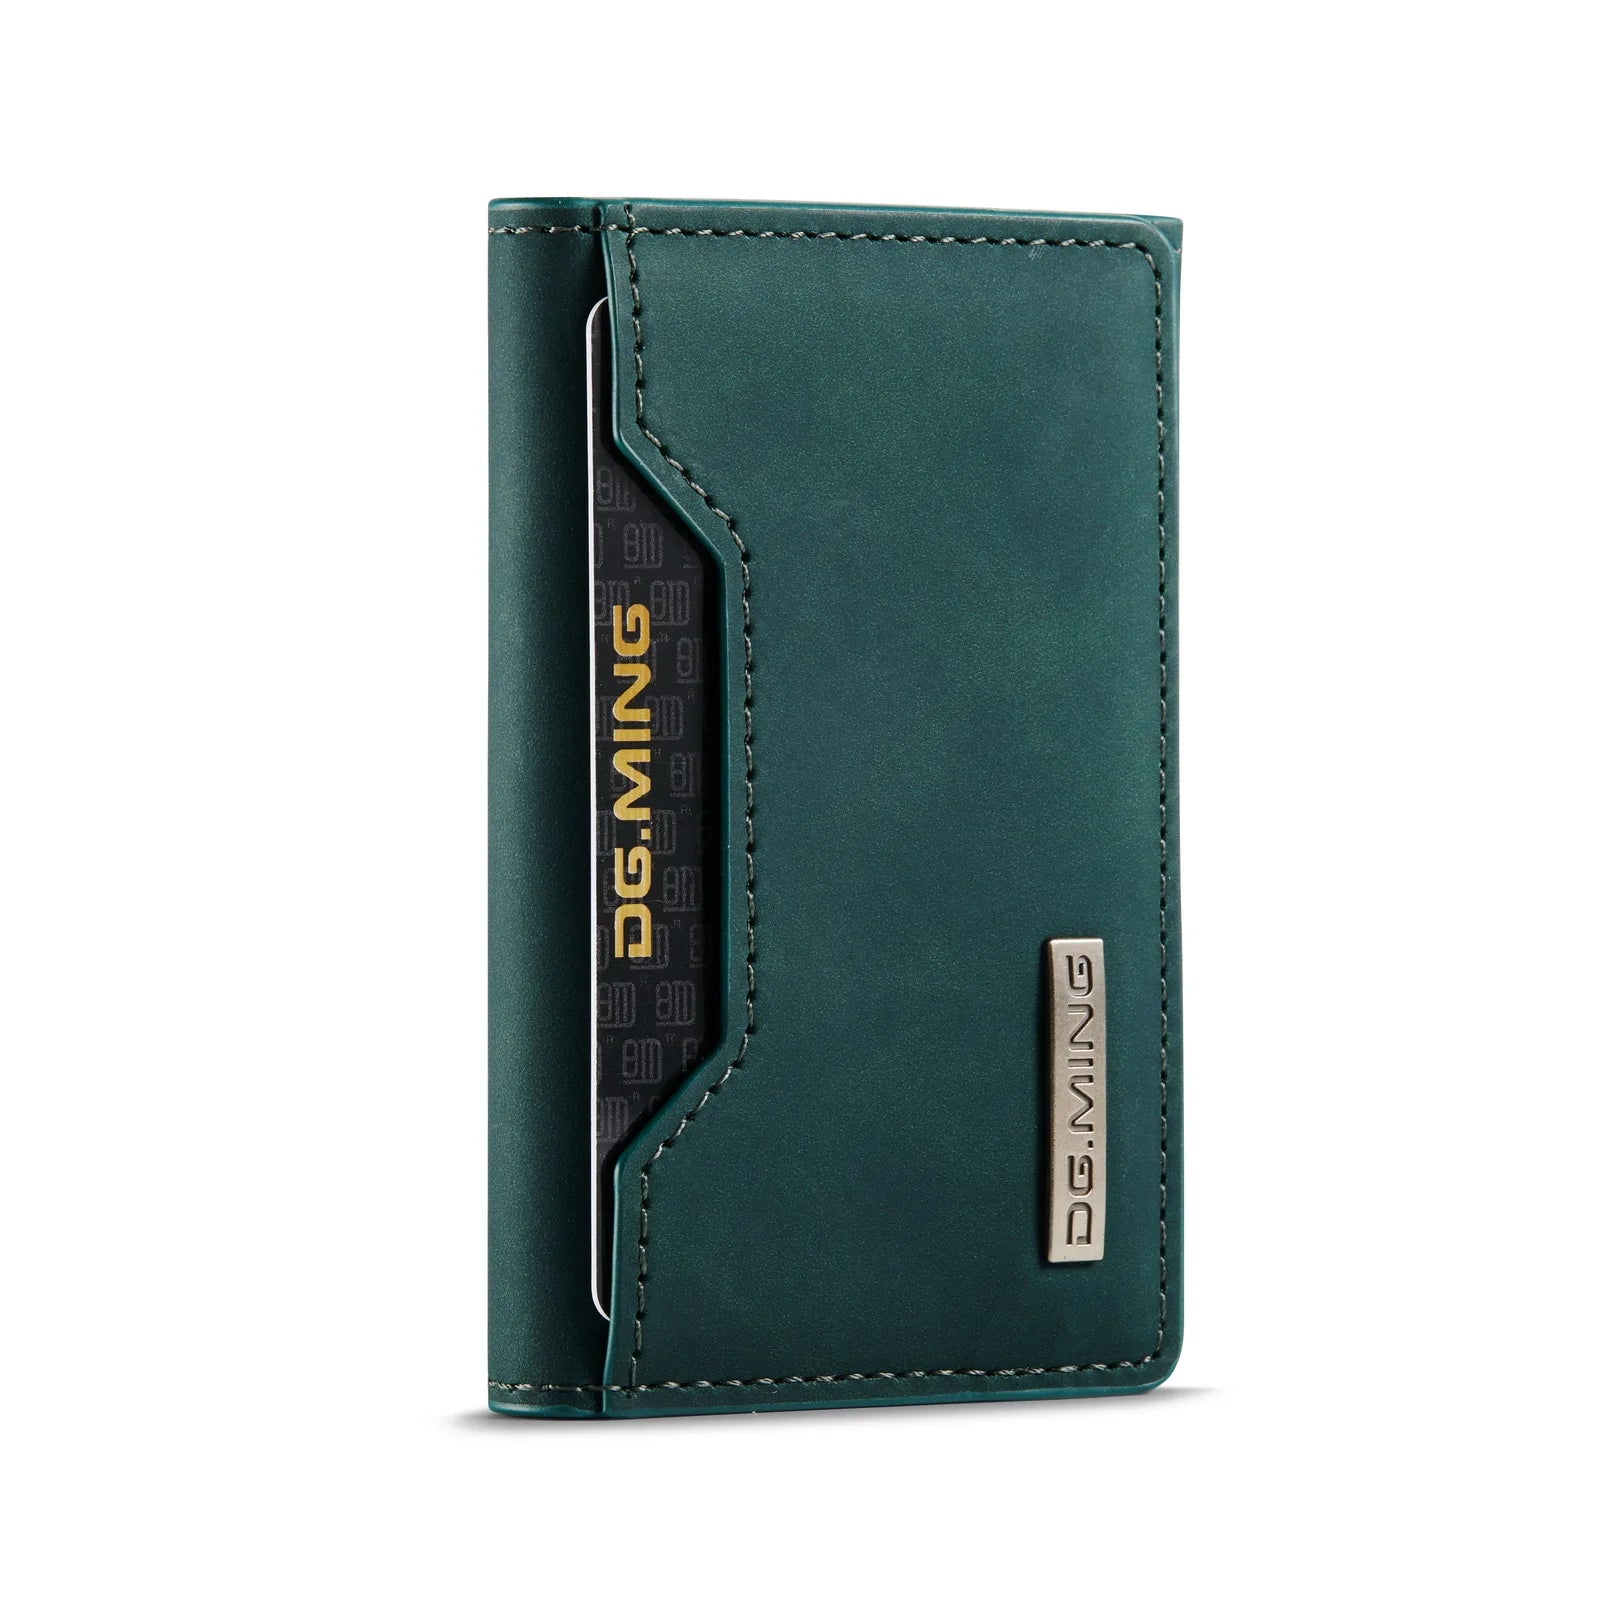 Card Holder Wallet Leather Magnetic attraction galaxy Note and S Case - DealJustDeal